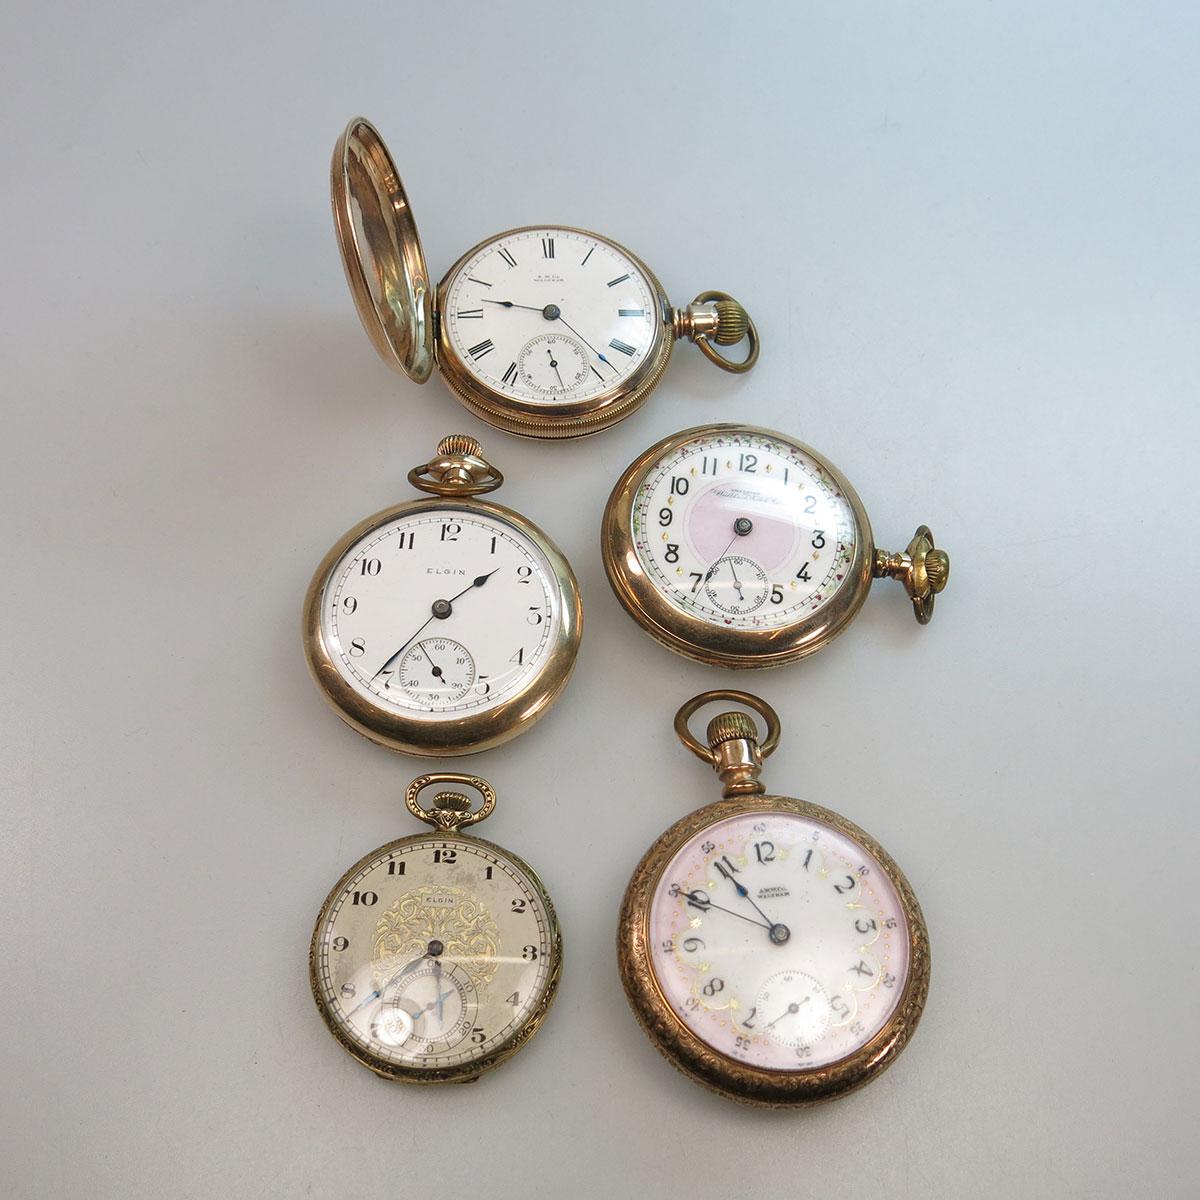 3 Waltham And 2 Elgin Pocket Watches